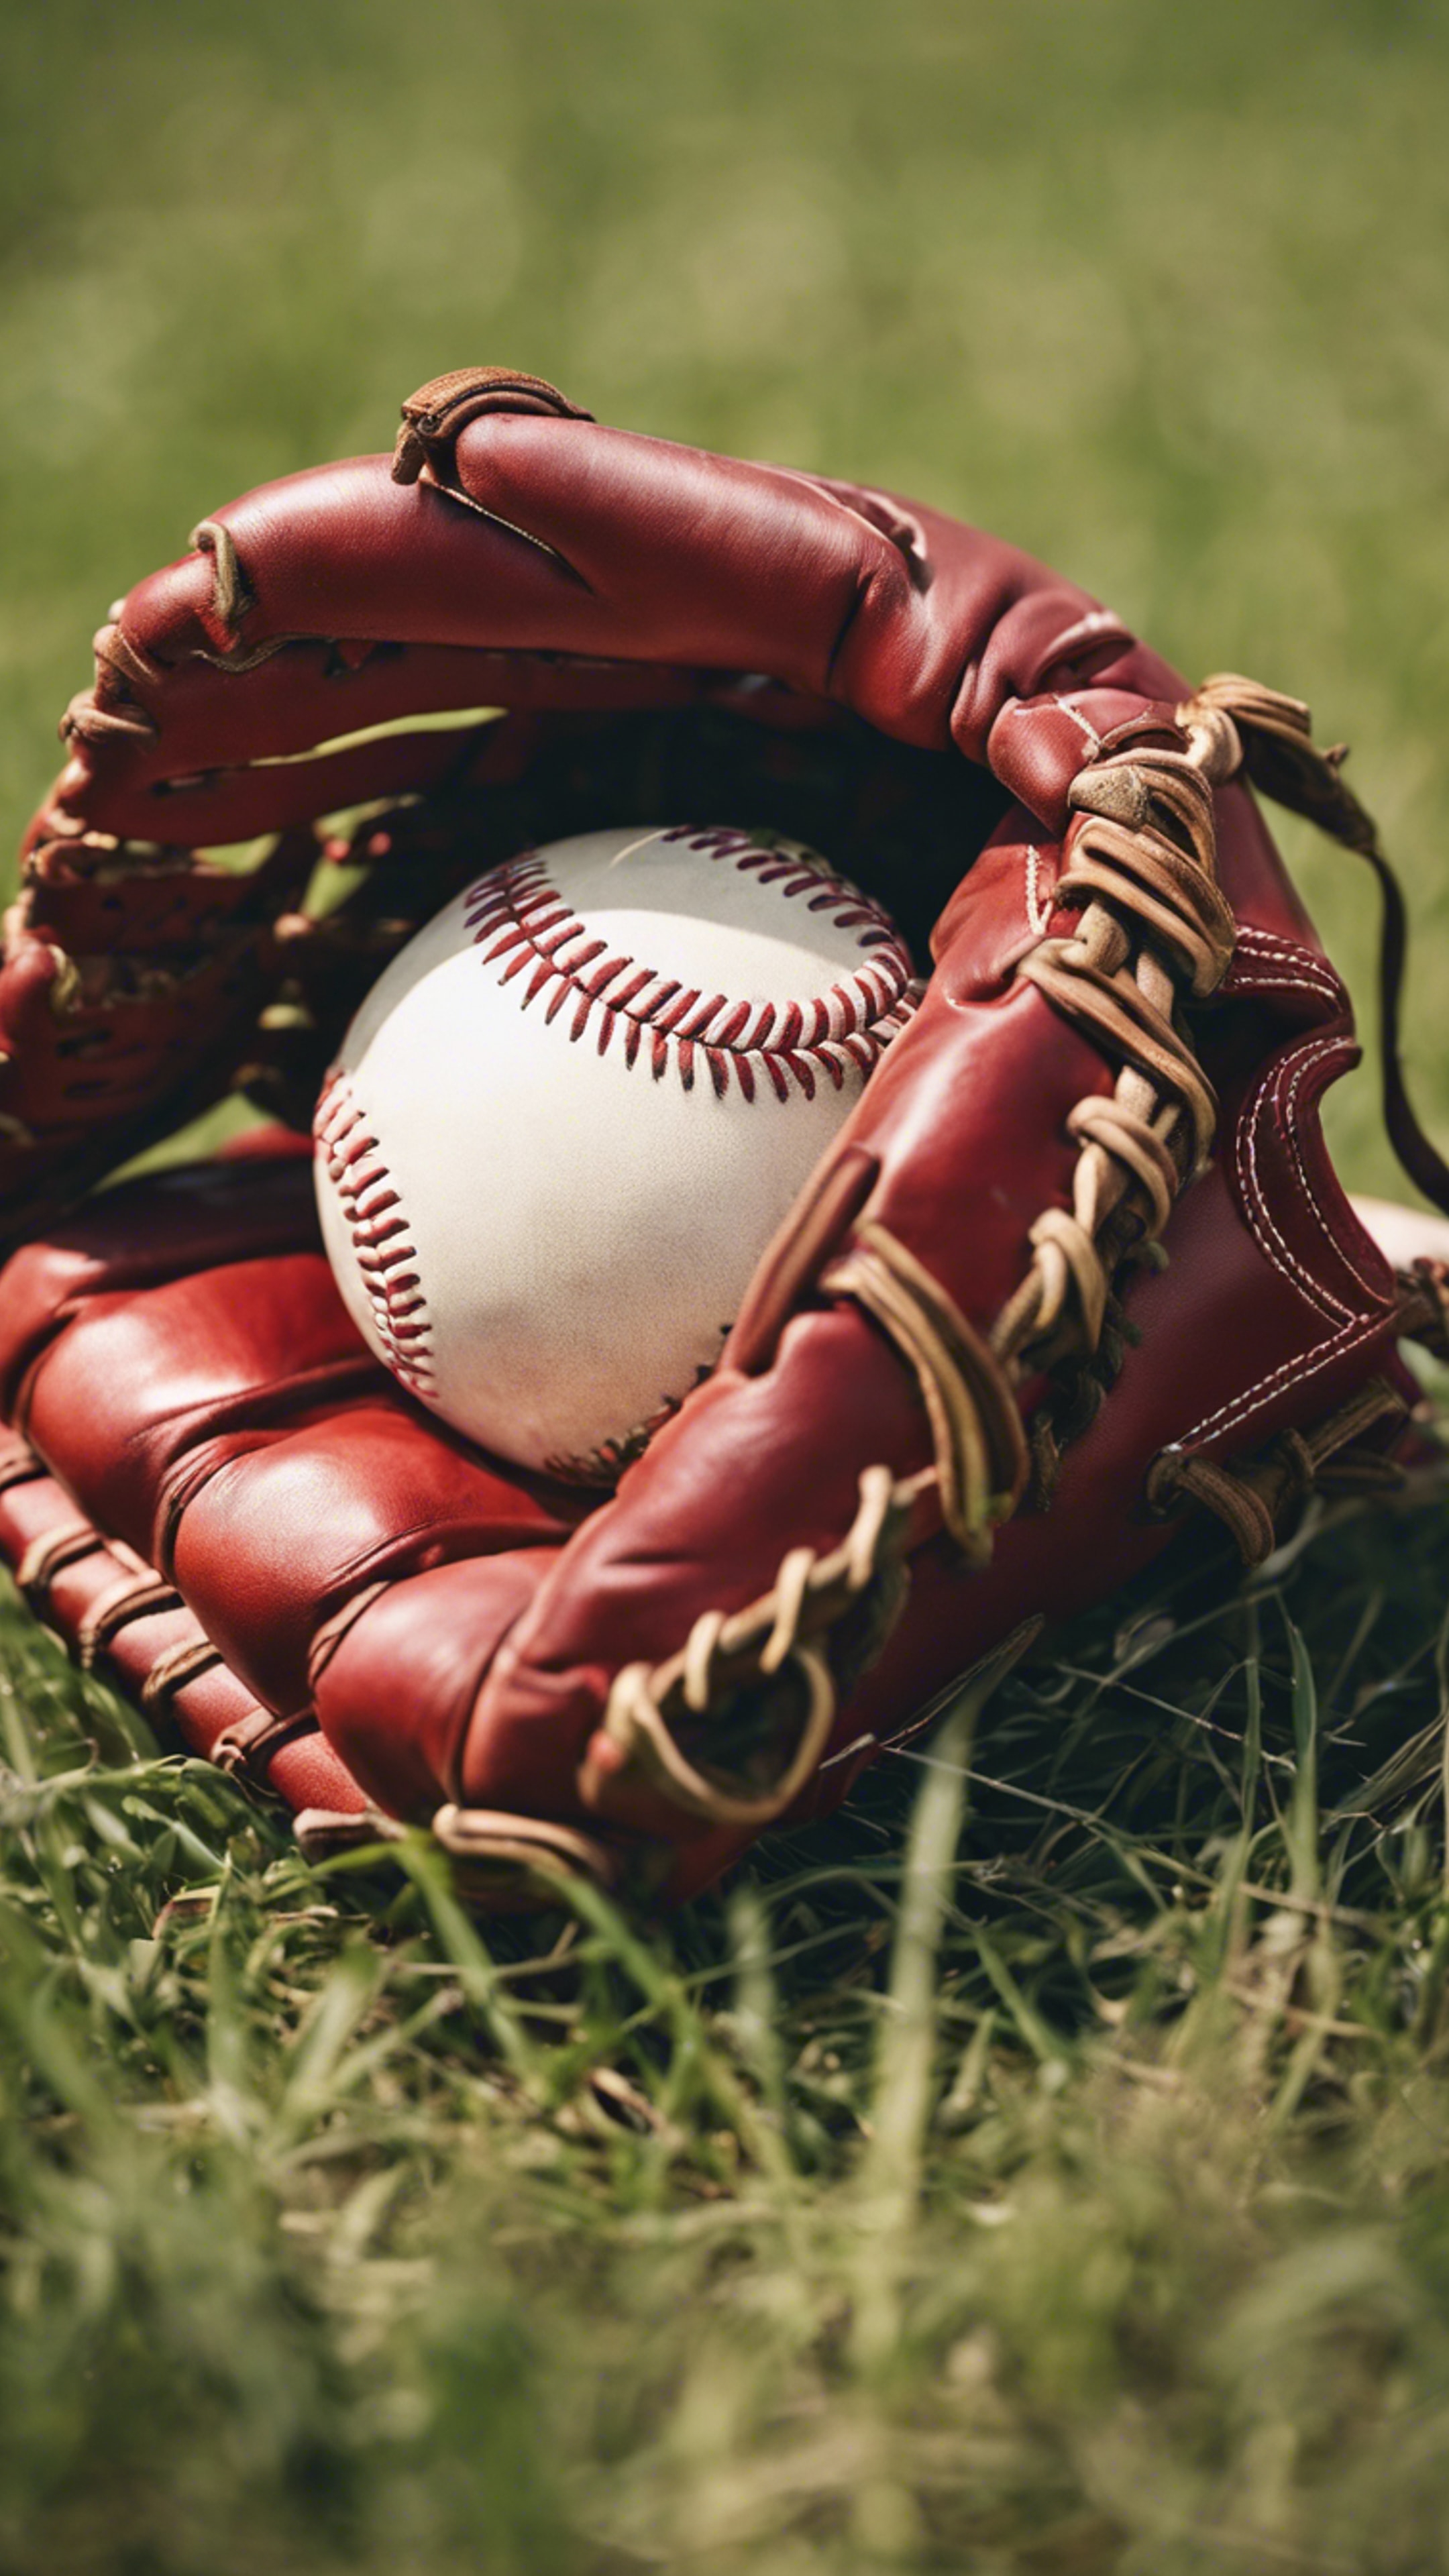 A striking red leather baseball glove on a grassy field right after a game. Tapet[10102f7c198241d6b5bd]